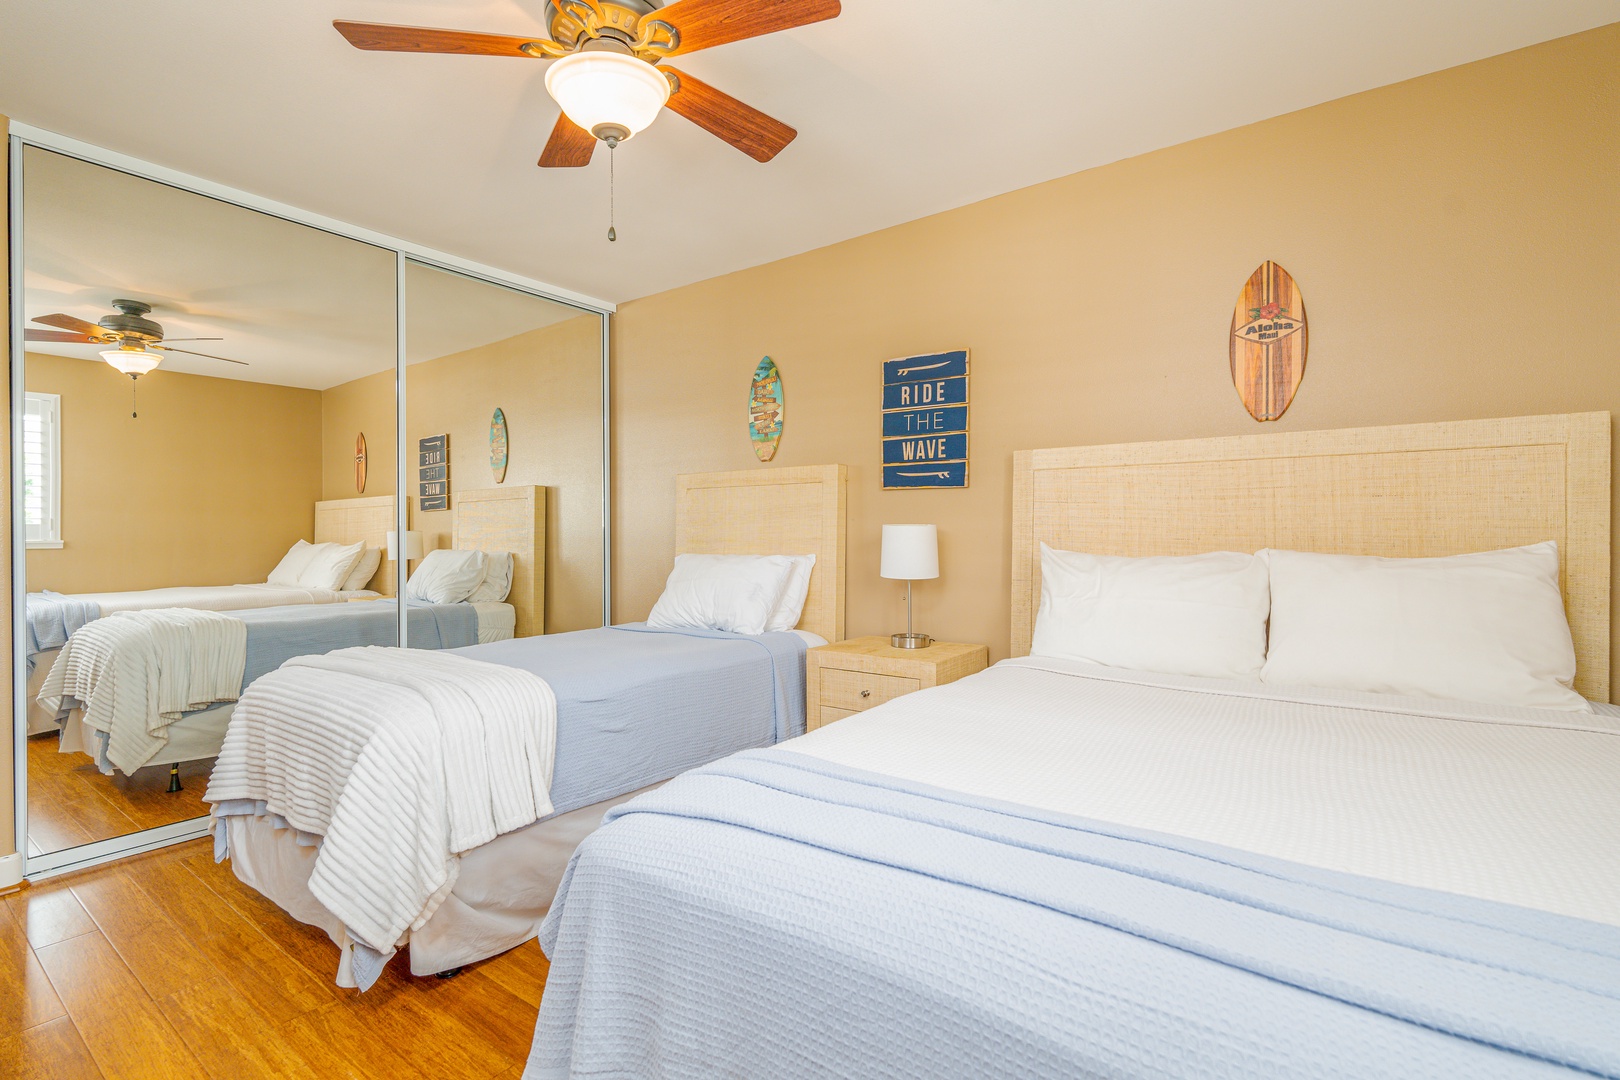 Kapolei Vacation Rentals, Ko Olina Kai 1081C - The upstairs guest bedroom with a ceiling fan and large mirror.